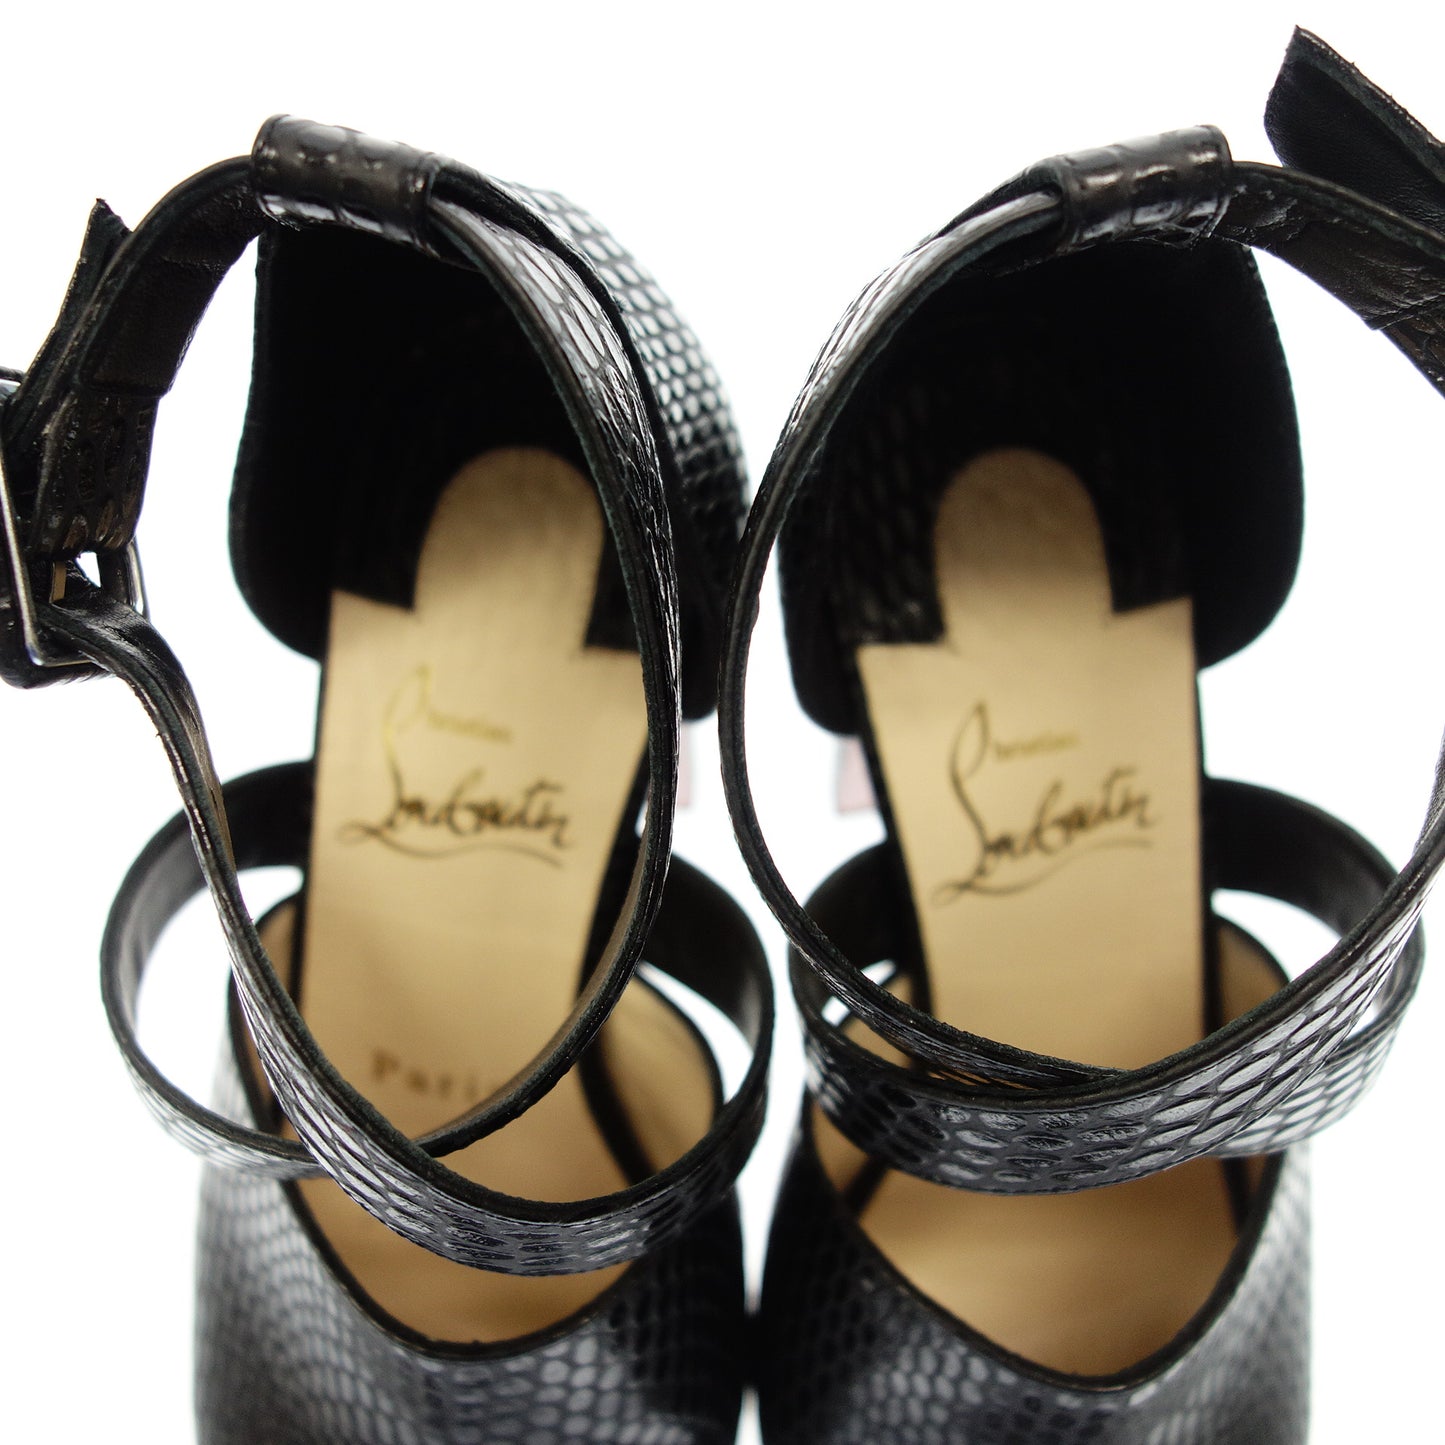 Good Condition◆Christian Louboutin Leather Sandals Embossed Women's Black Size 34.5 Christian Louboutin [AFD4] 